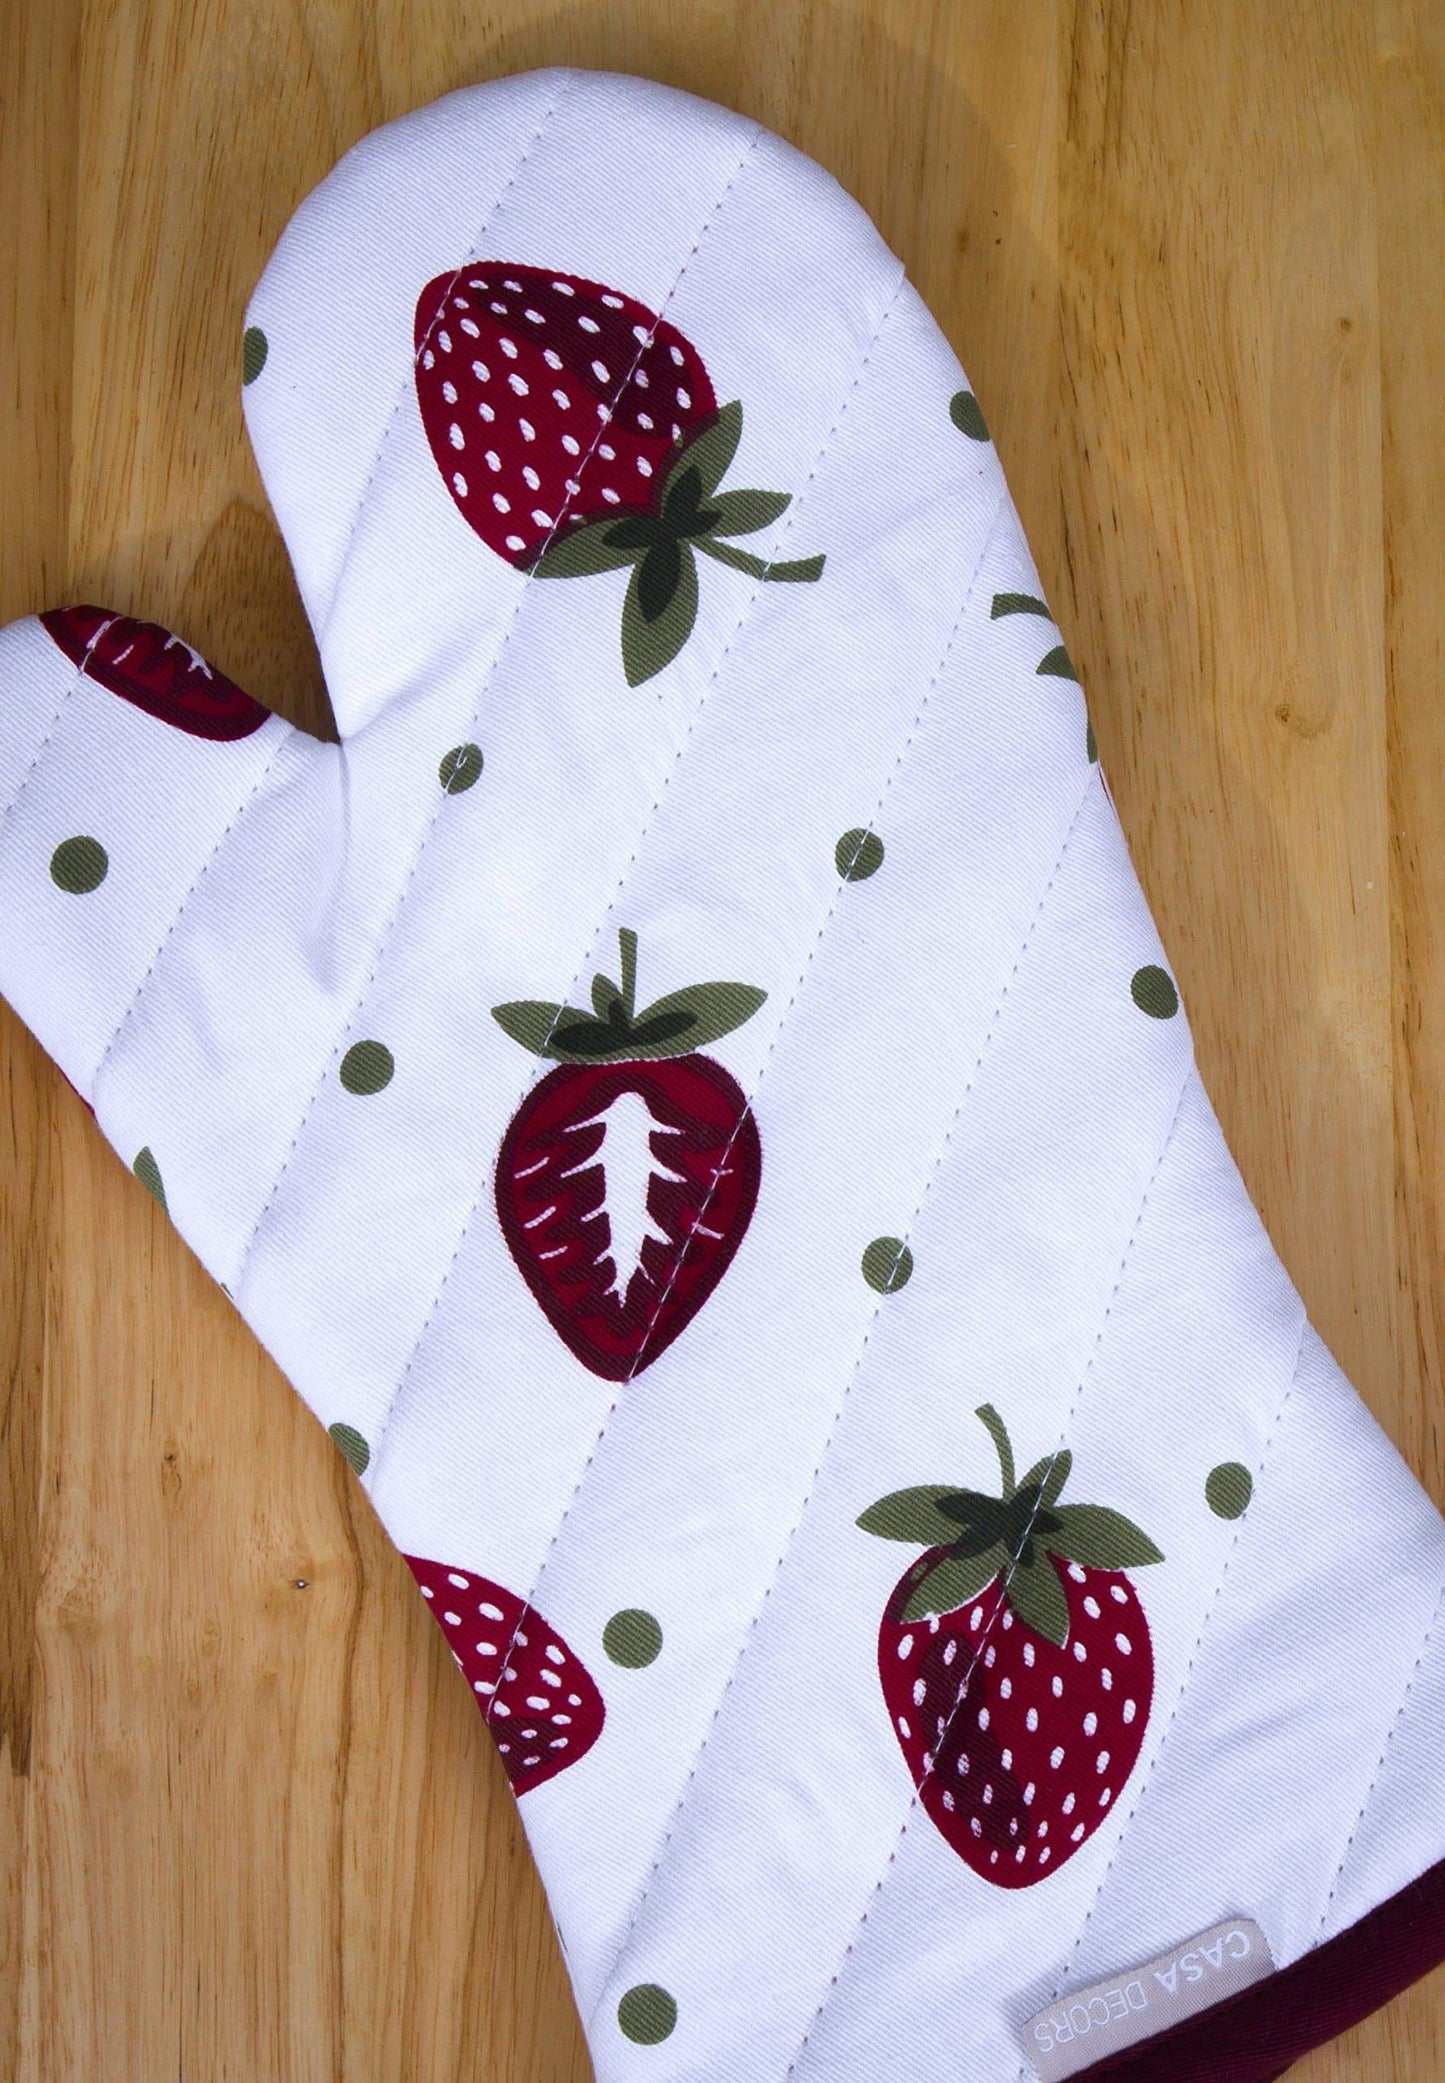 Online shopping casa decors set of apron oven mitt pot holder pair of kitchen towels in a unique berry blast design made of 100 cotton eco friendly safe value pack and ideal gift set kitchen linen set